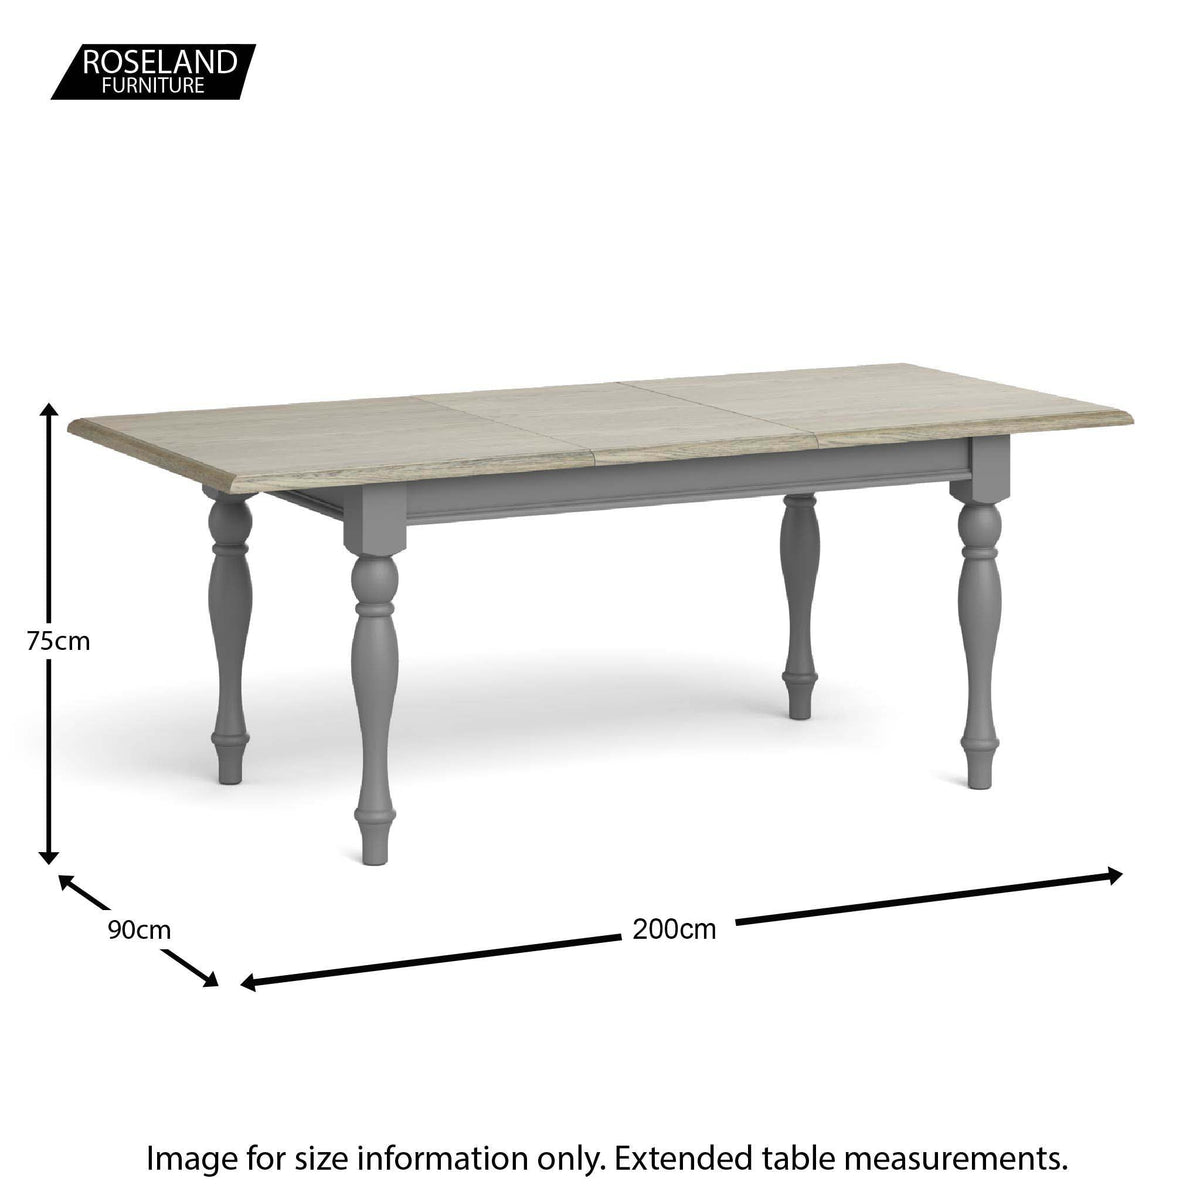 Dimensions for the Extended Mulsanne Grey Dining Table